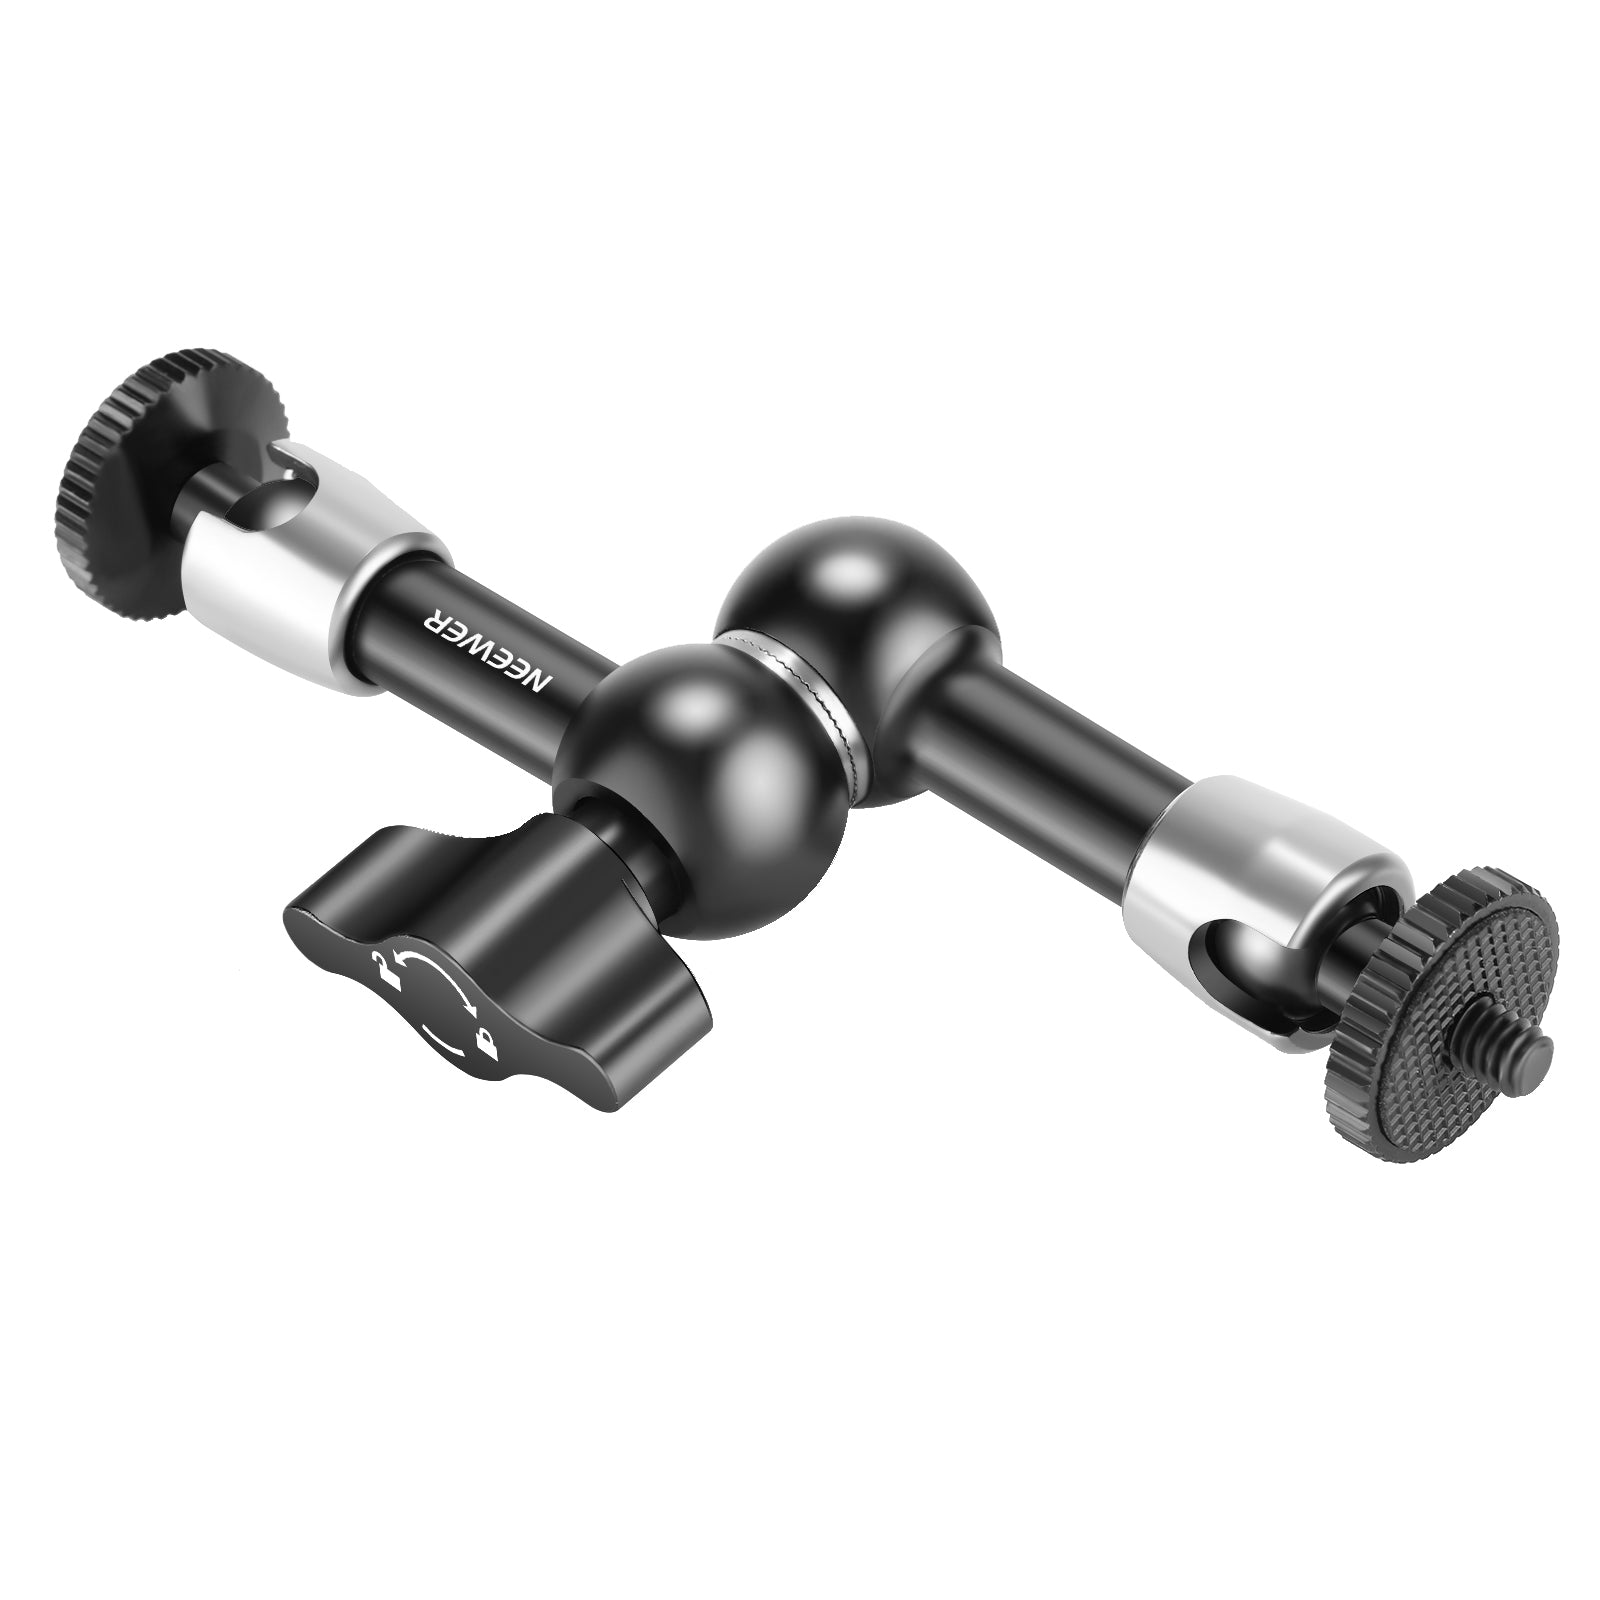 Neewer ST15/ST25 5.9" or 9.8" Adjustable Friction Magic Arm with Both 1/4-inch Thread Screw